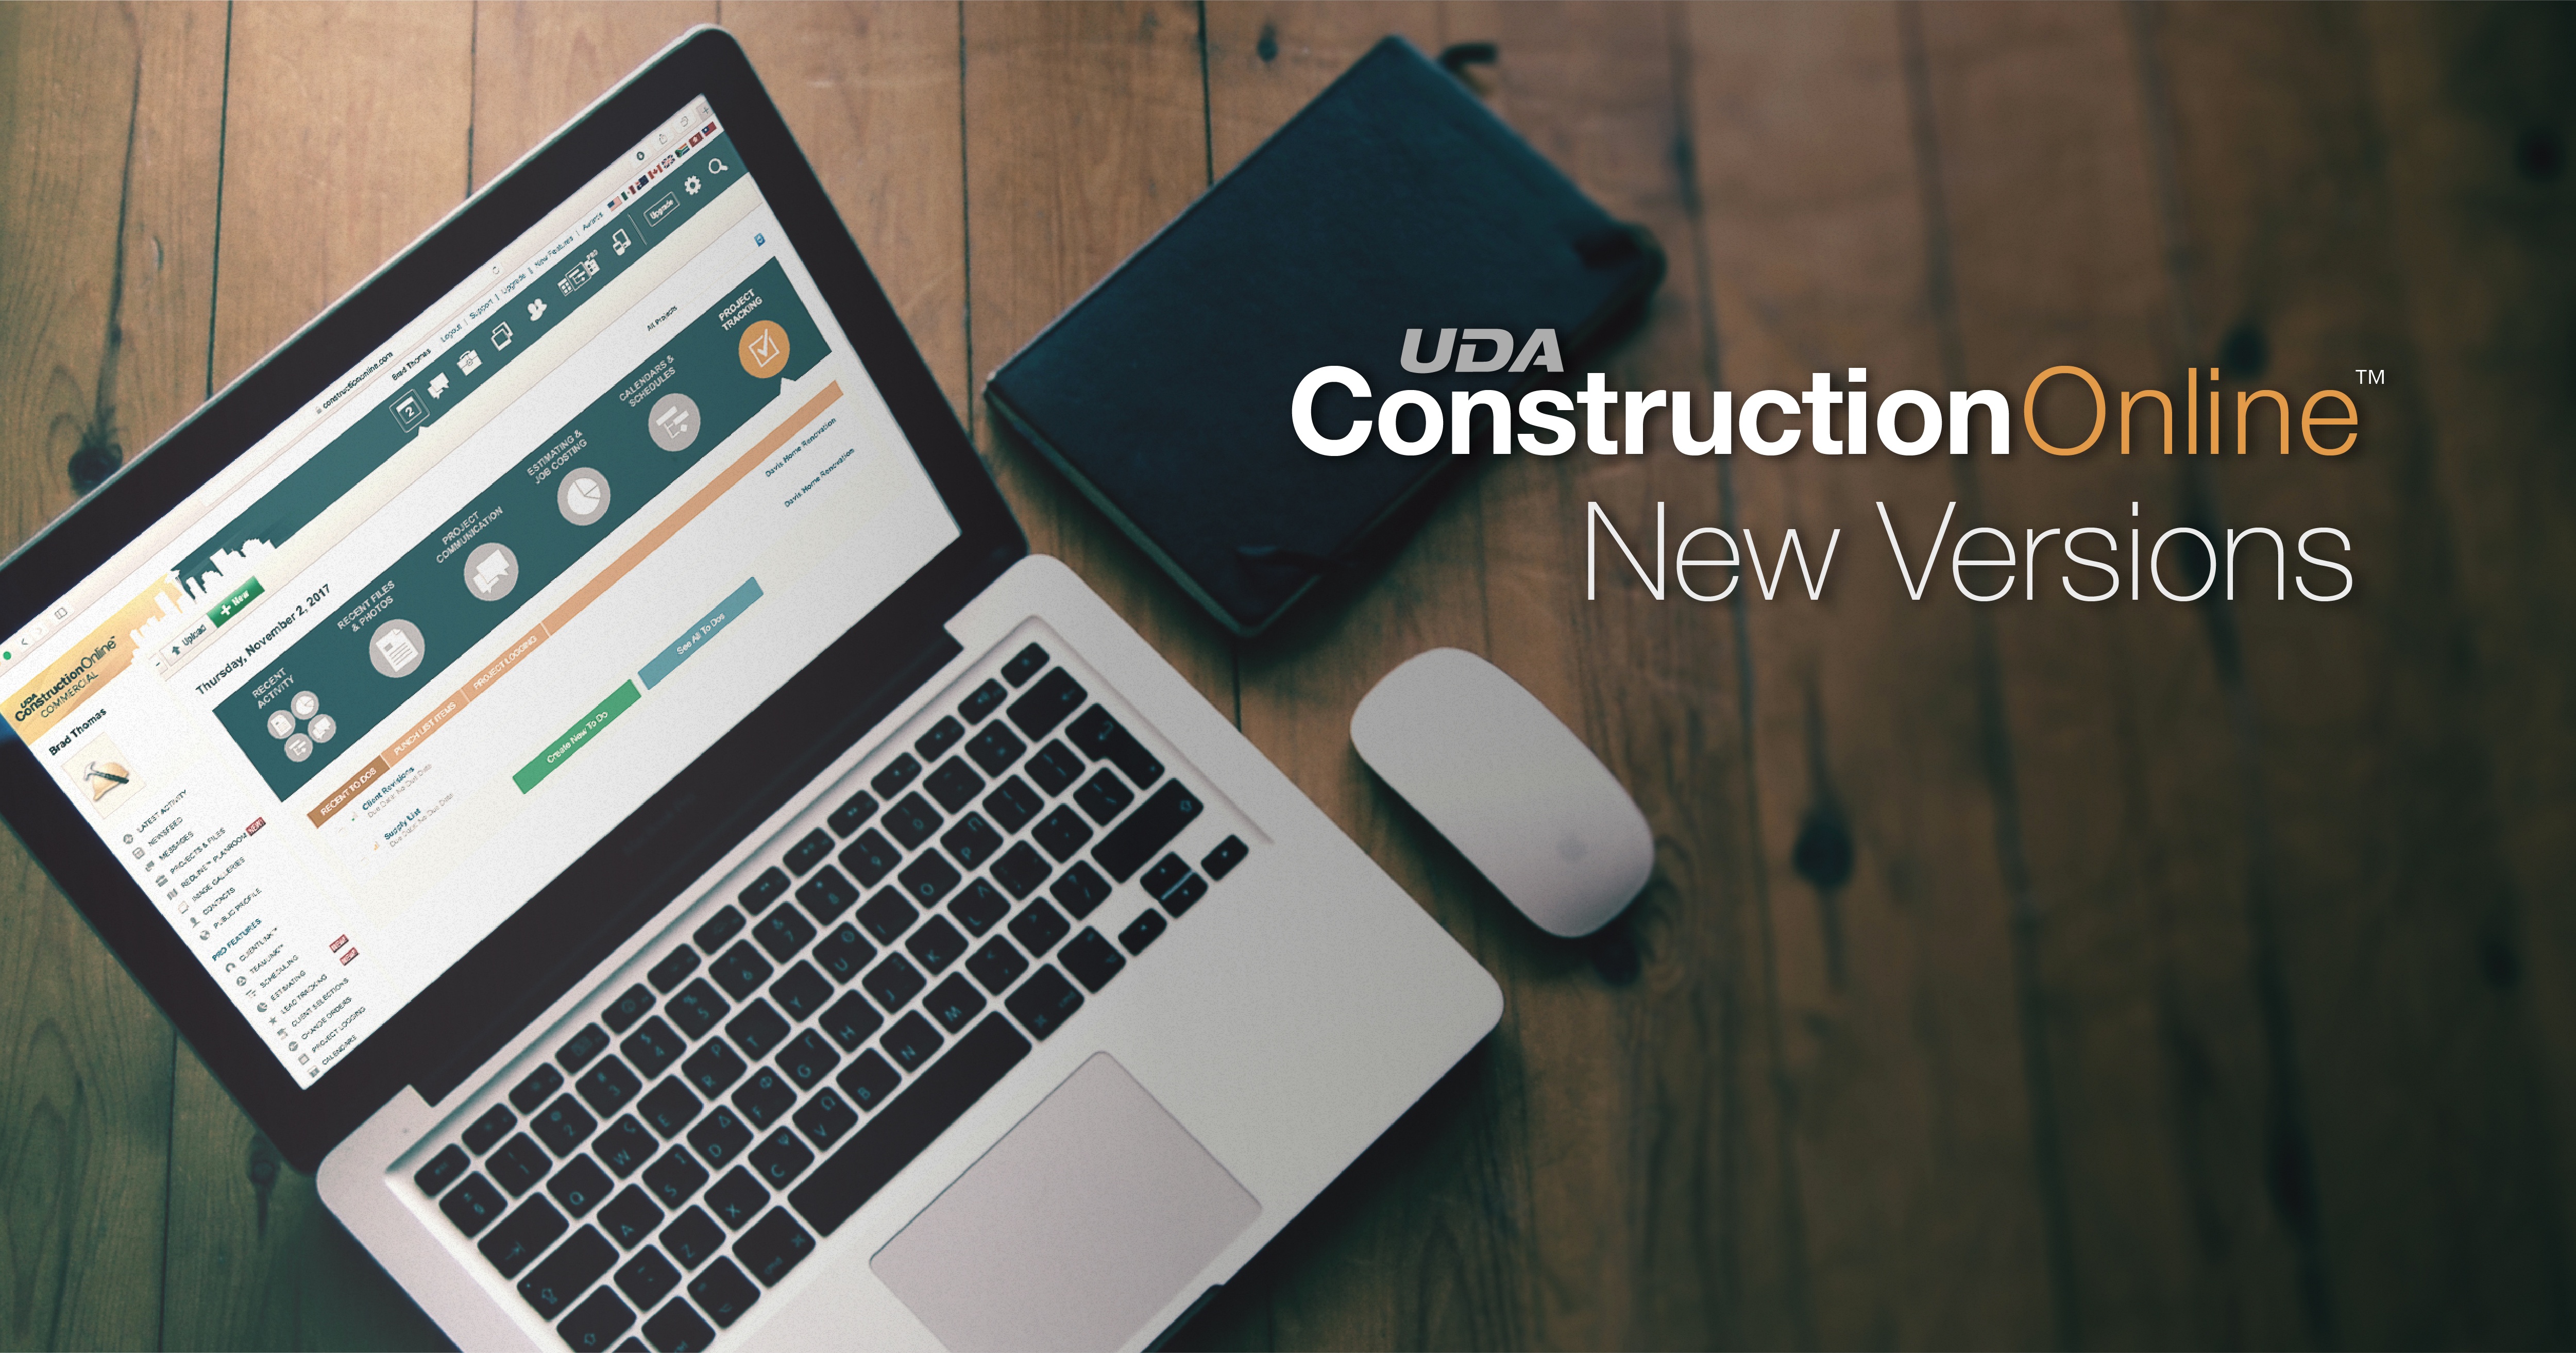 UDA Introduces New Versions of ConstructionOnline